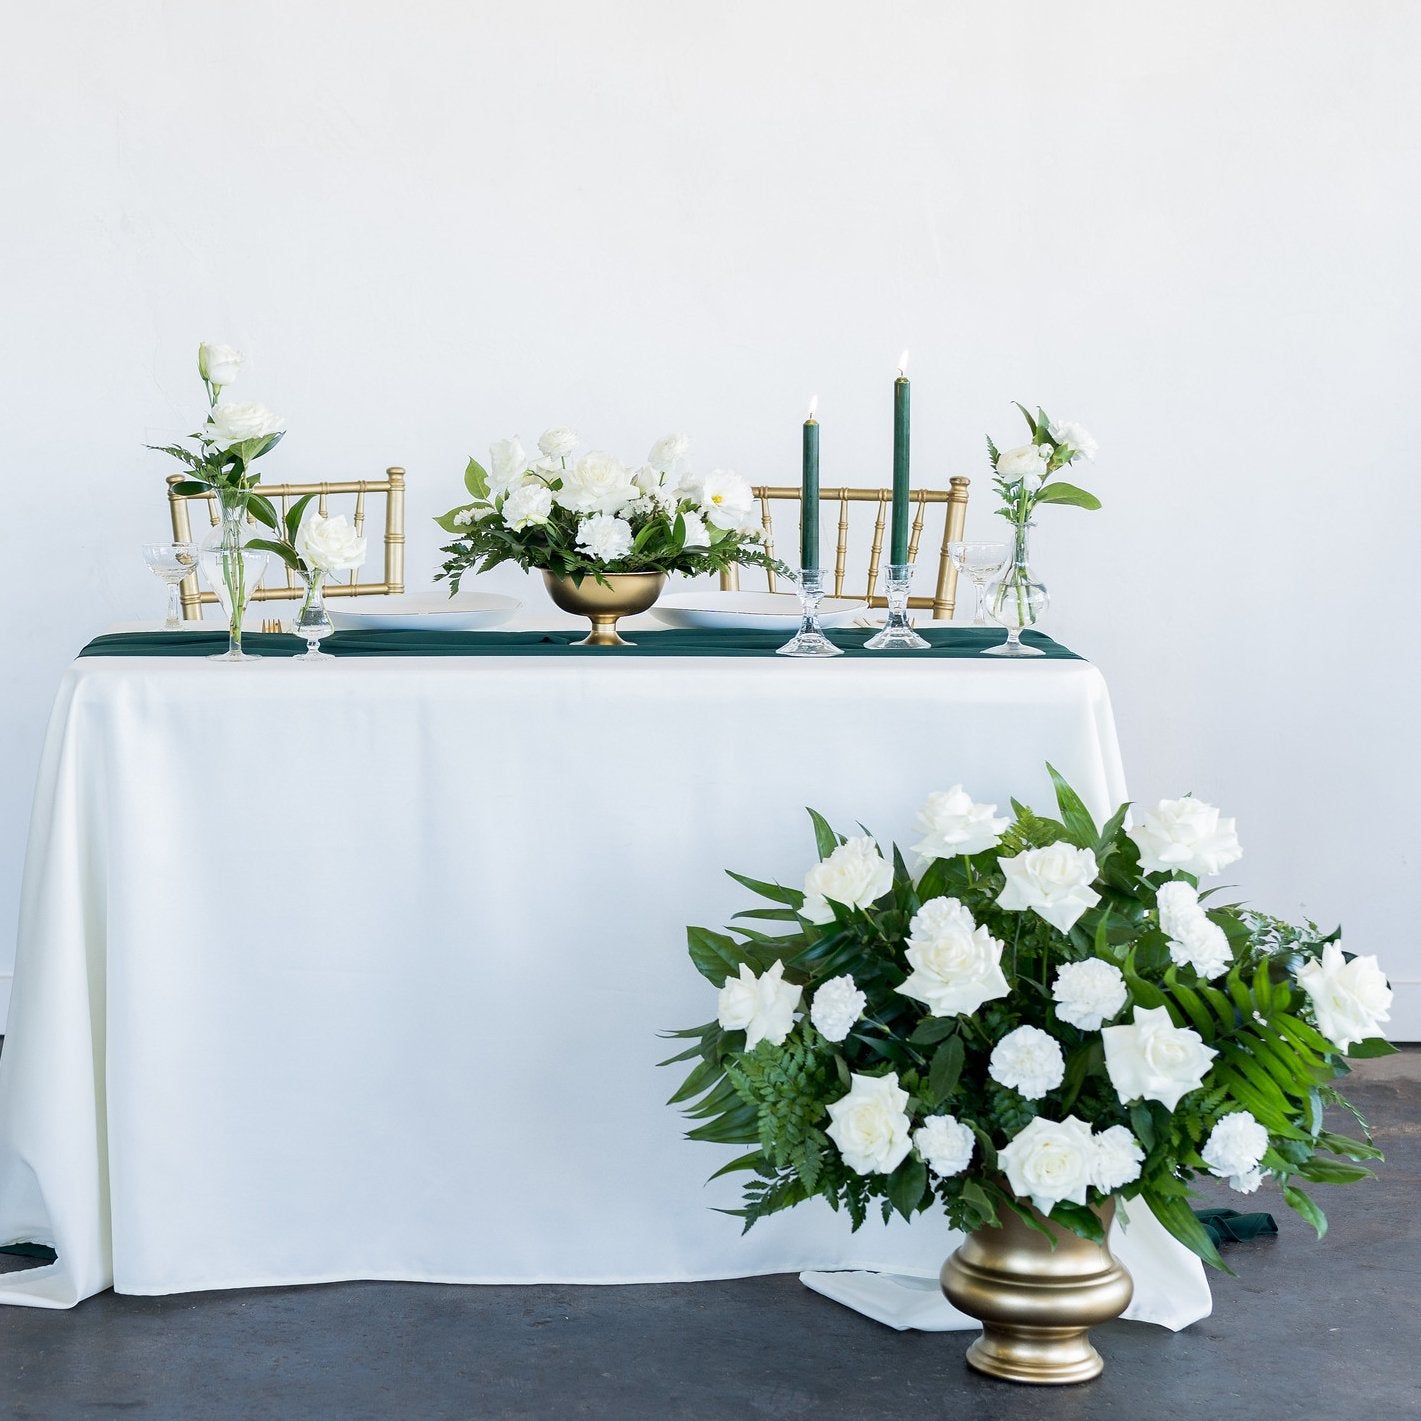 White and green wedding centerpiece with gold vases